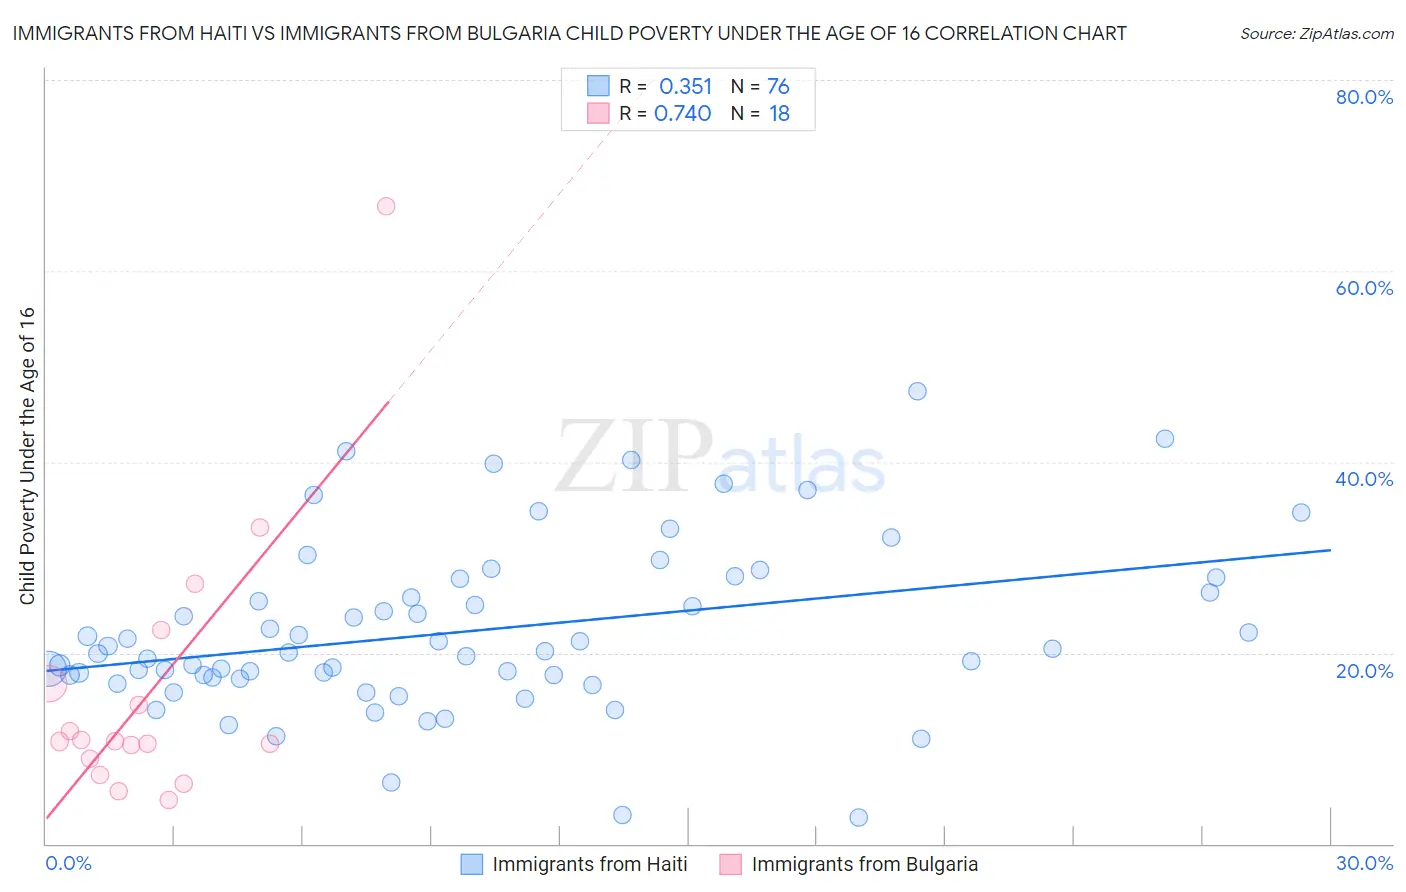 Immigrants from Haiti vs Immigrants from Bulgaria Child Poverty Under the Age of 16